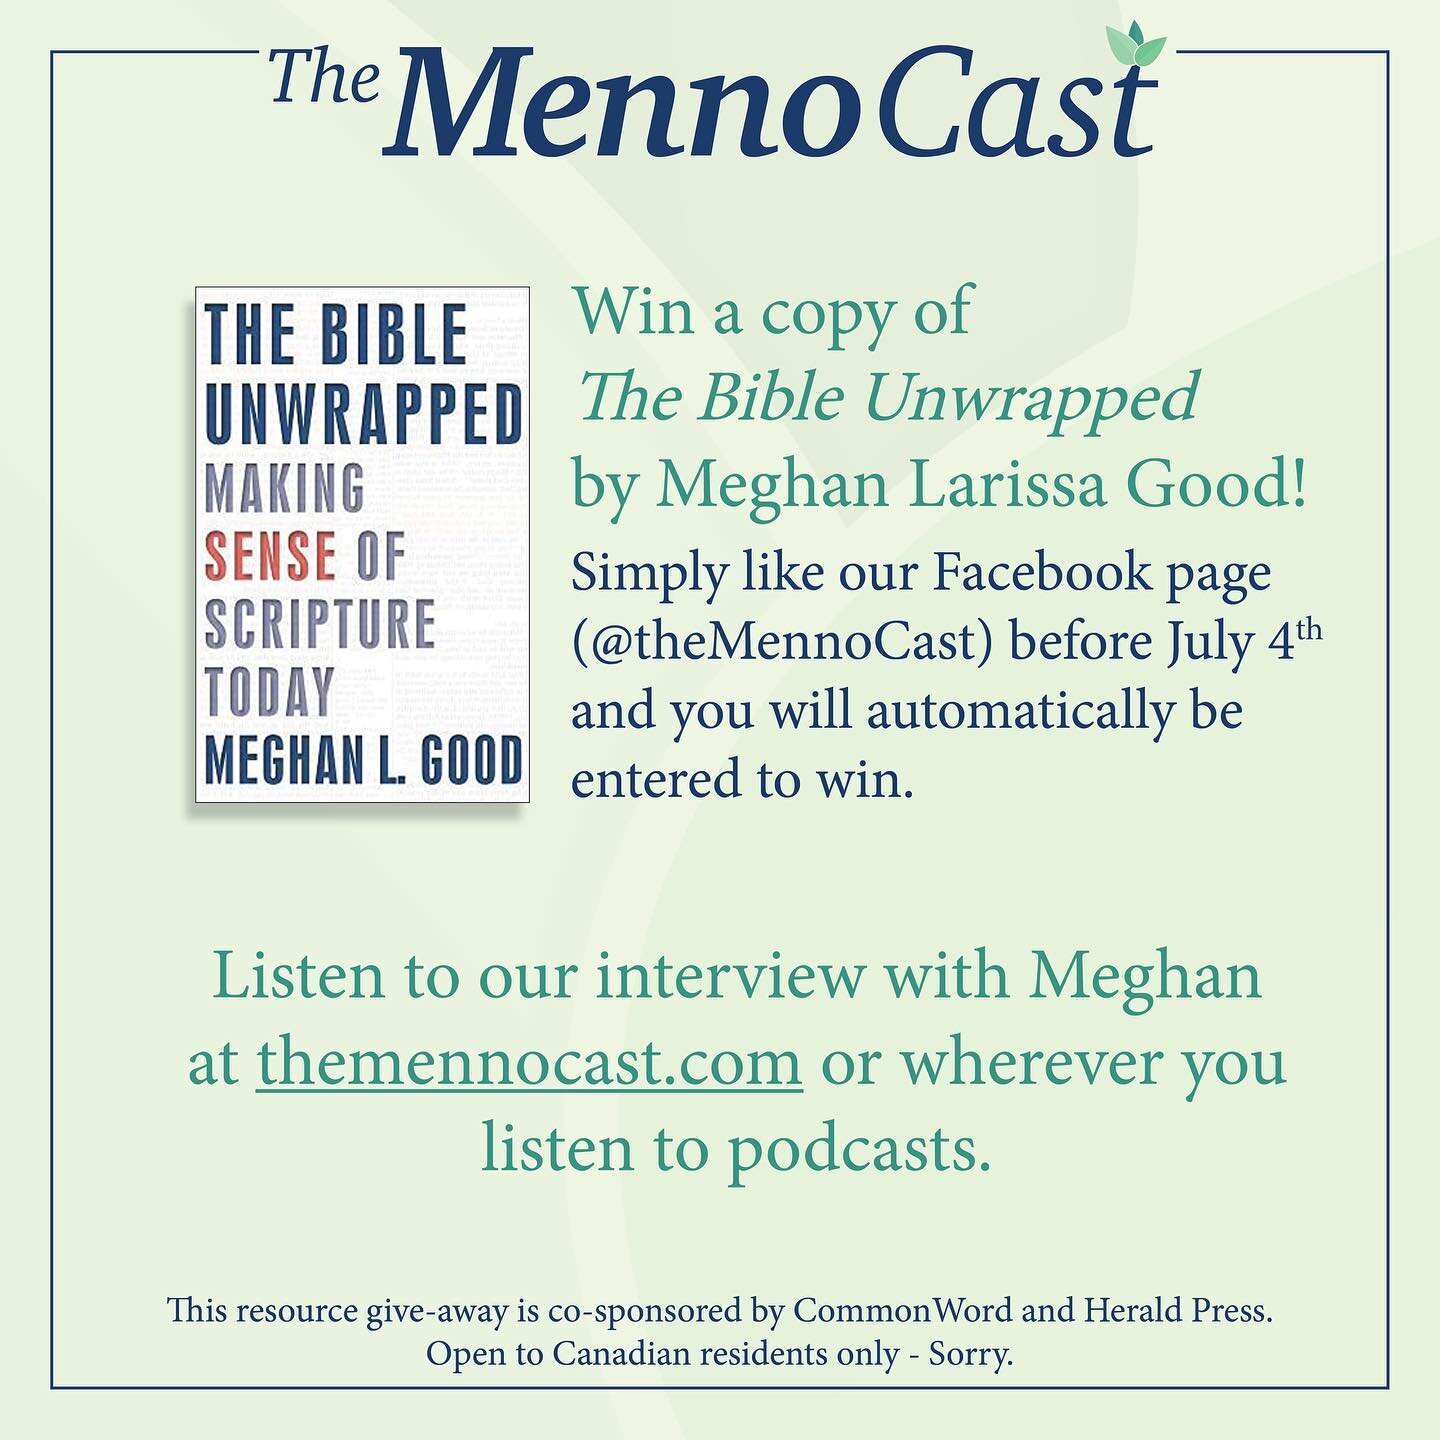 You can win a copy of Meghan&rsquo;s book entitled The Bible Unwrapped! Simply like our Facebook page before July 4th and it can be yours (as long as you reside in Canada, sorry).